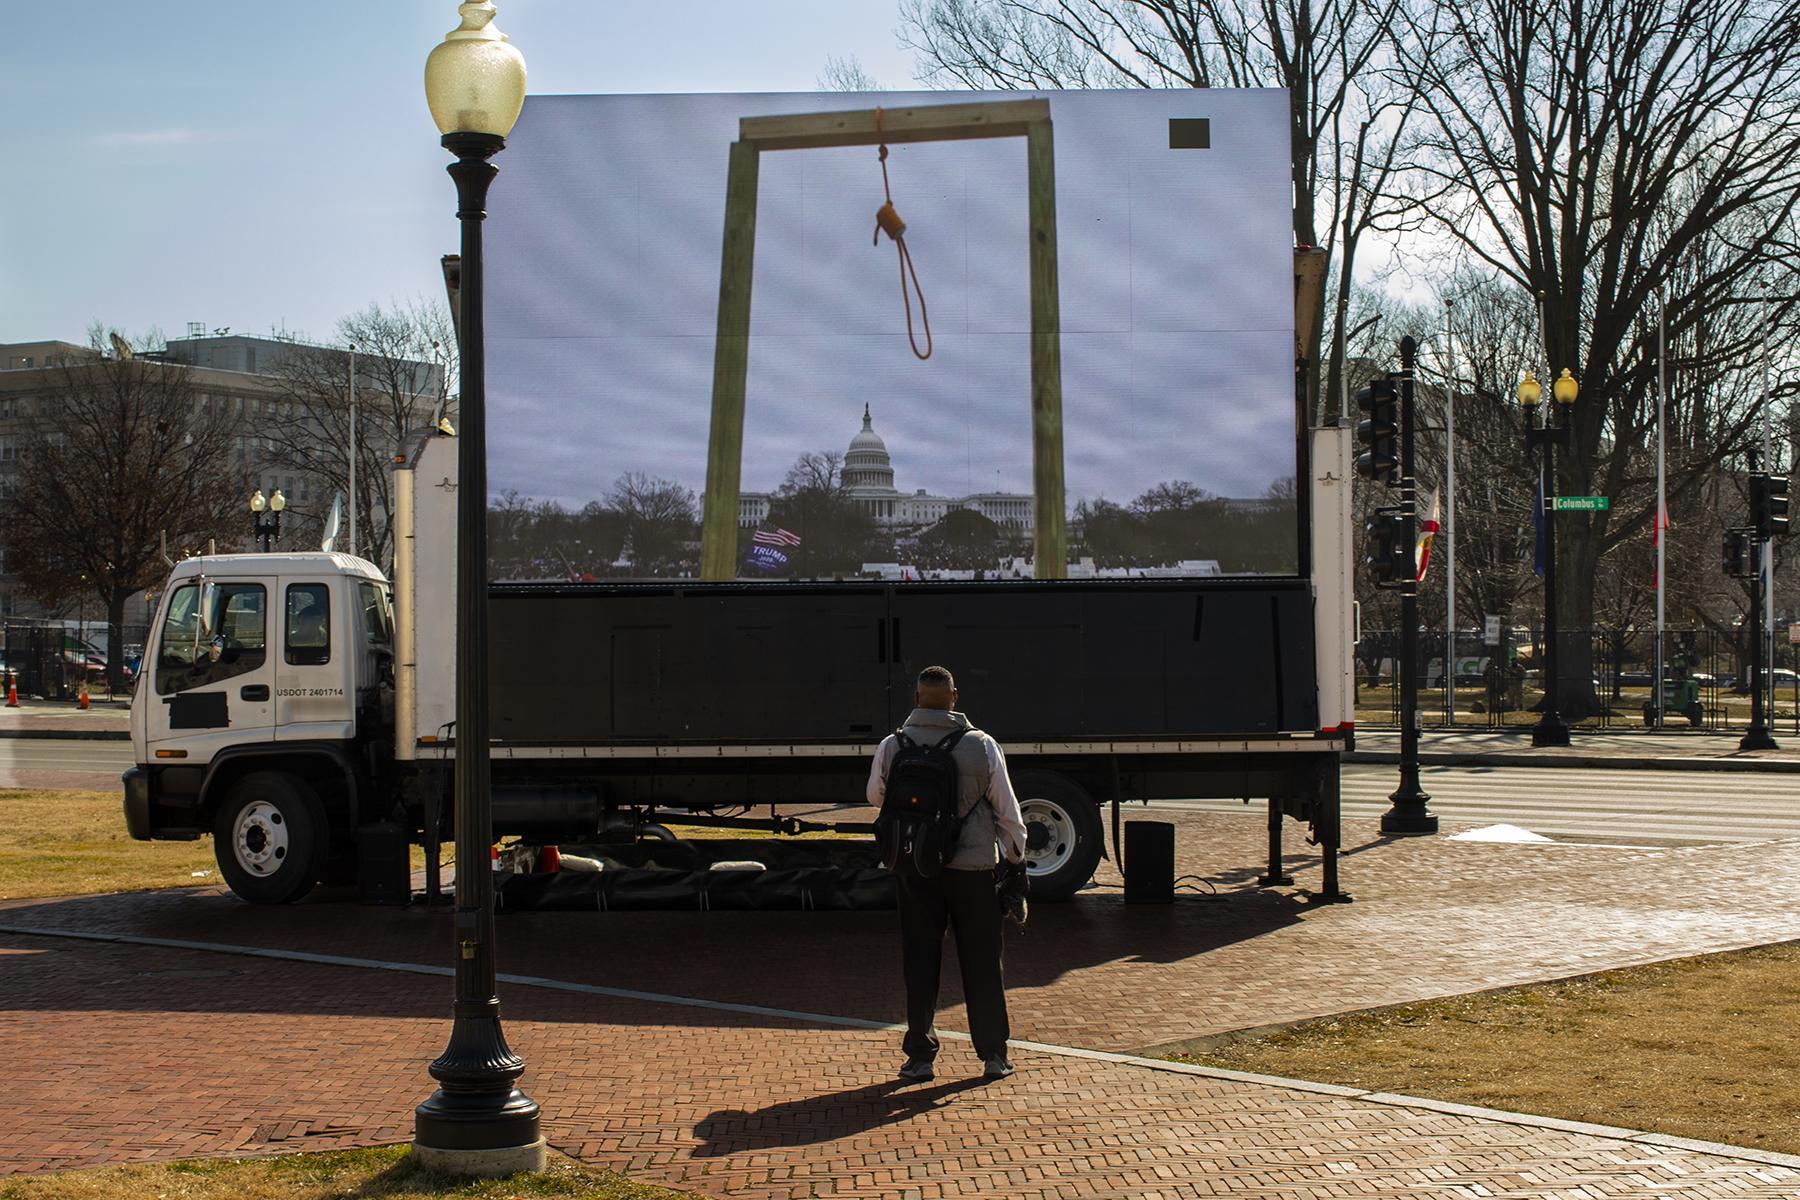 Views of the Capitol - February 9, 2021, A sign truck is parked in front of...